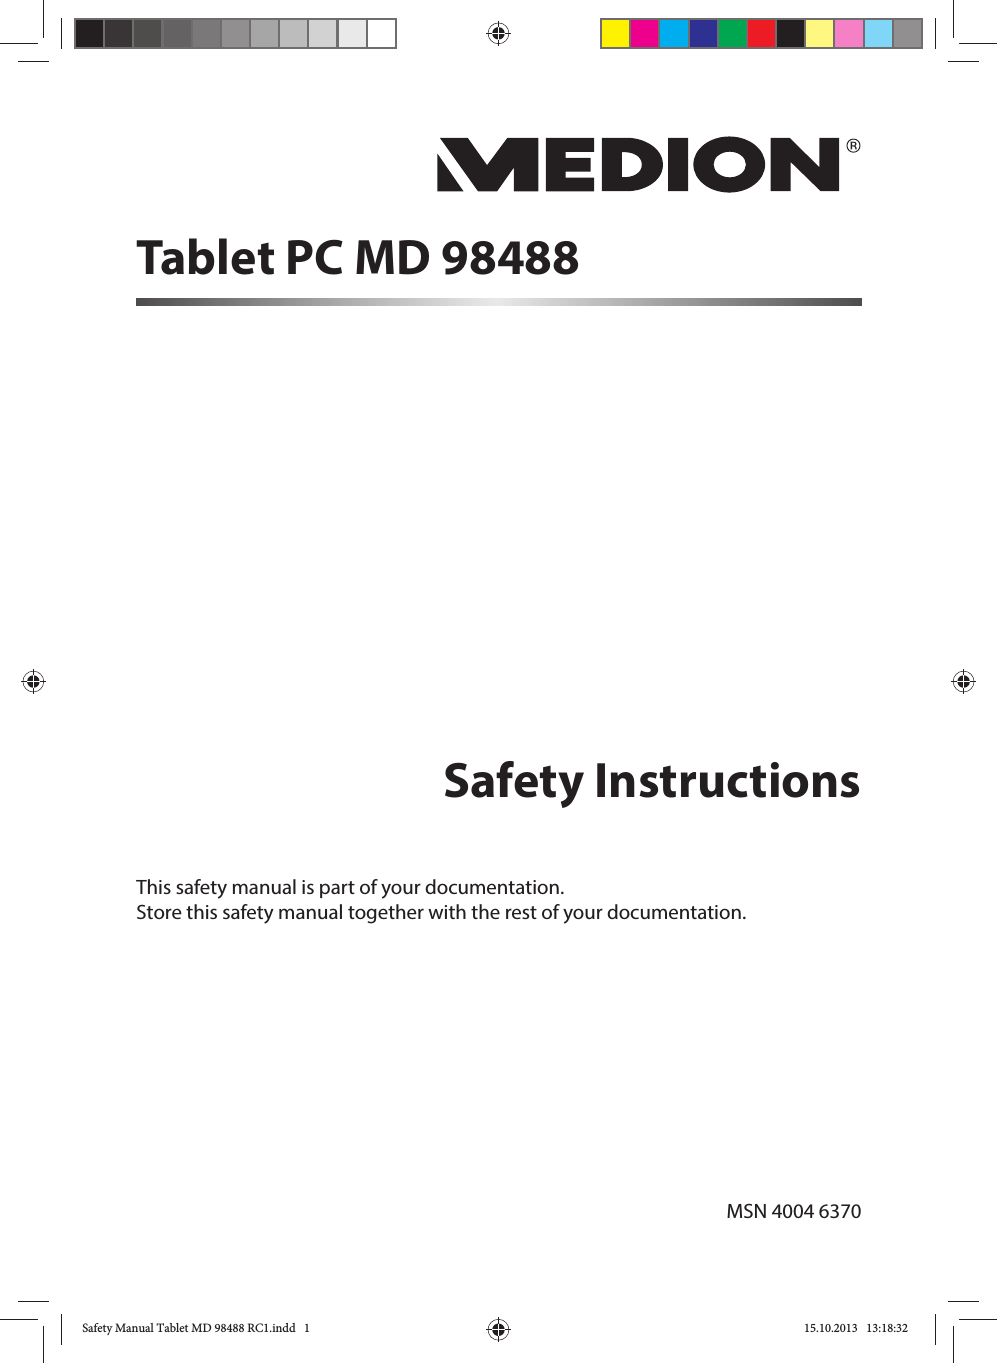 Safety InstructionsThis safety manual is part of your documentation. Store this safety manual together with the rest of your documentation.Tablet PC MD 98488MSN 4004 6370 Safety Manual Tablet MD 98488 RC1.indd   1Safety Manual Tablet MD 98488 RC1.indd   1 15.10.2013   13:18:3215.10.2013   13:18:32